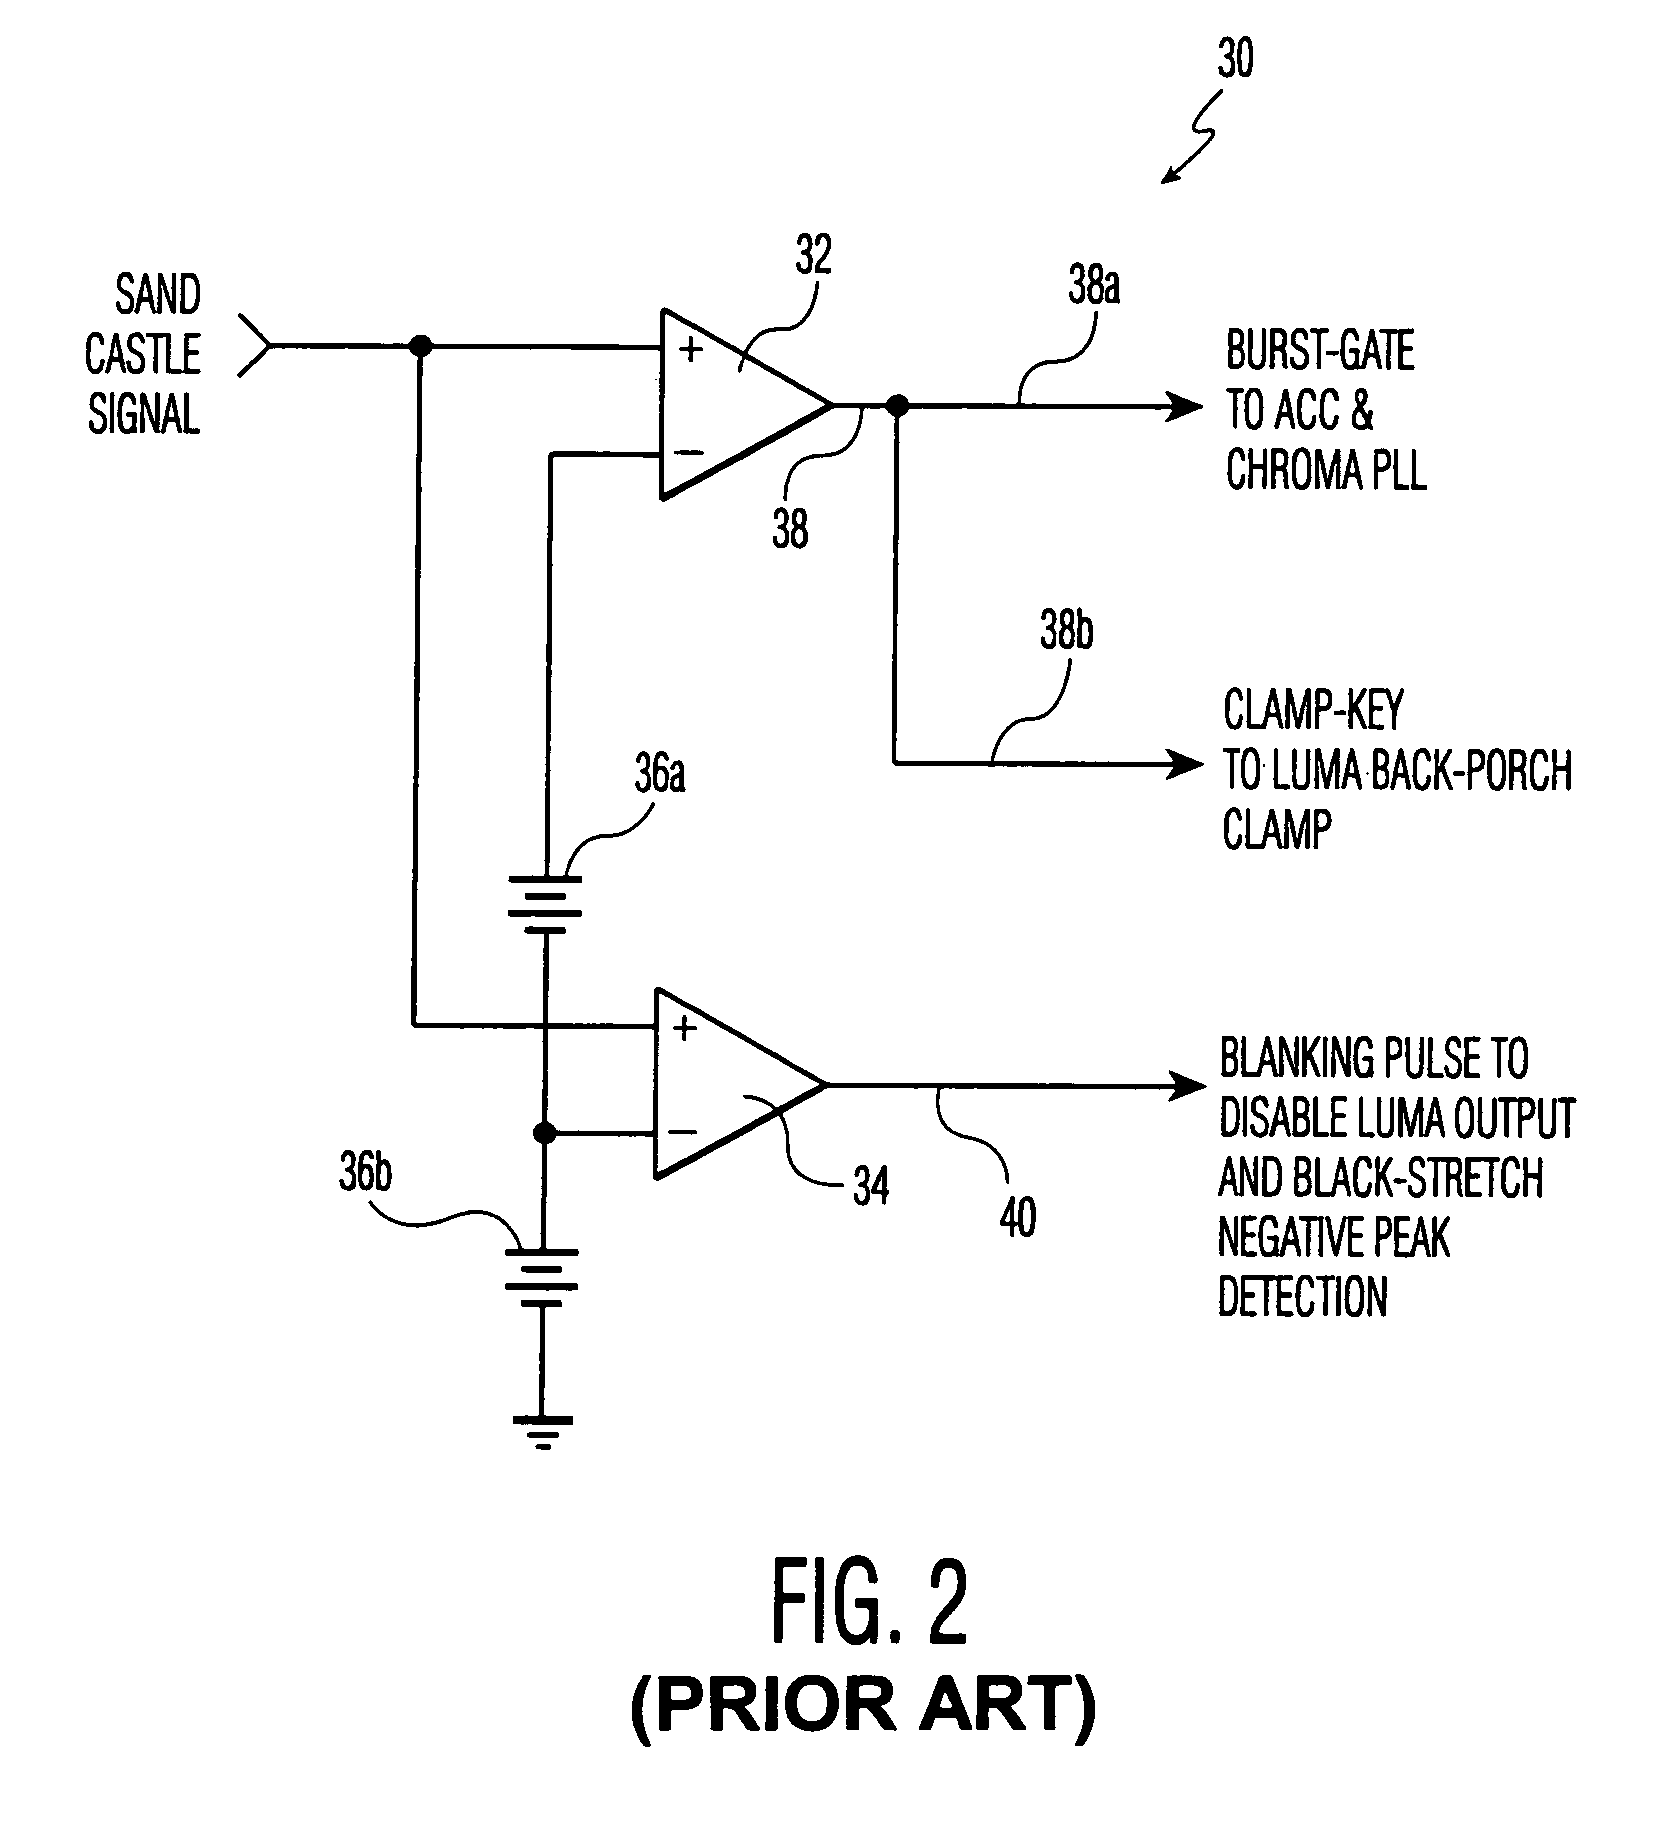 System, method and apparatus for sandcastle signal generation in a television signal processing device